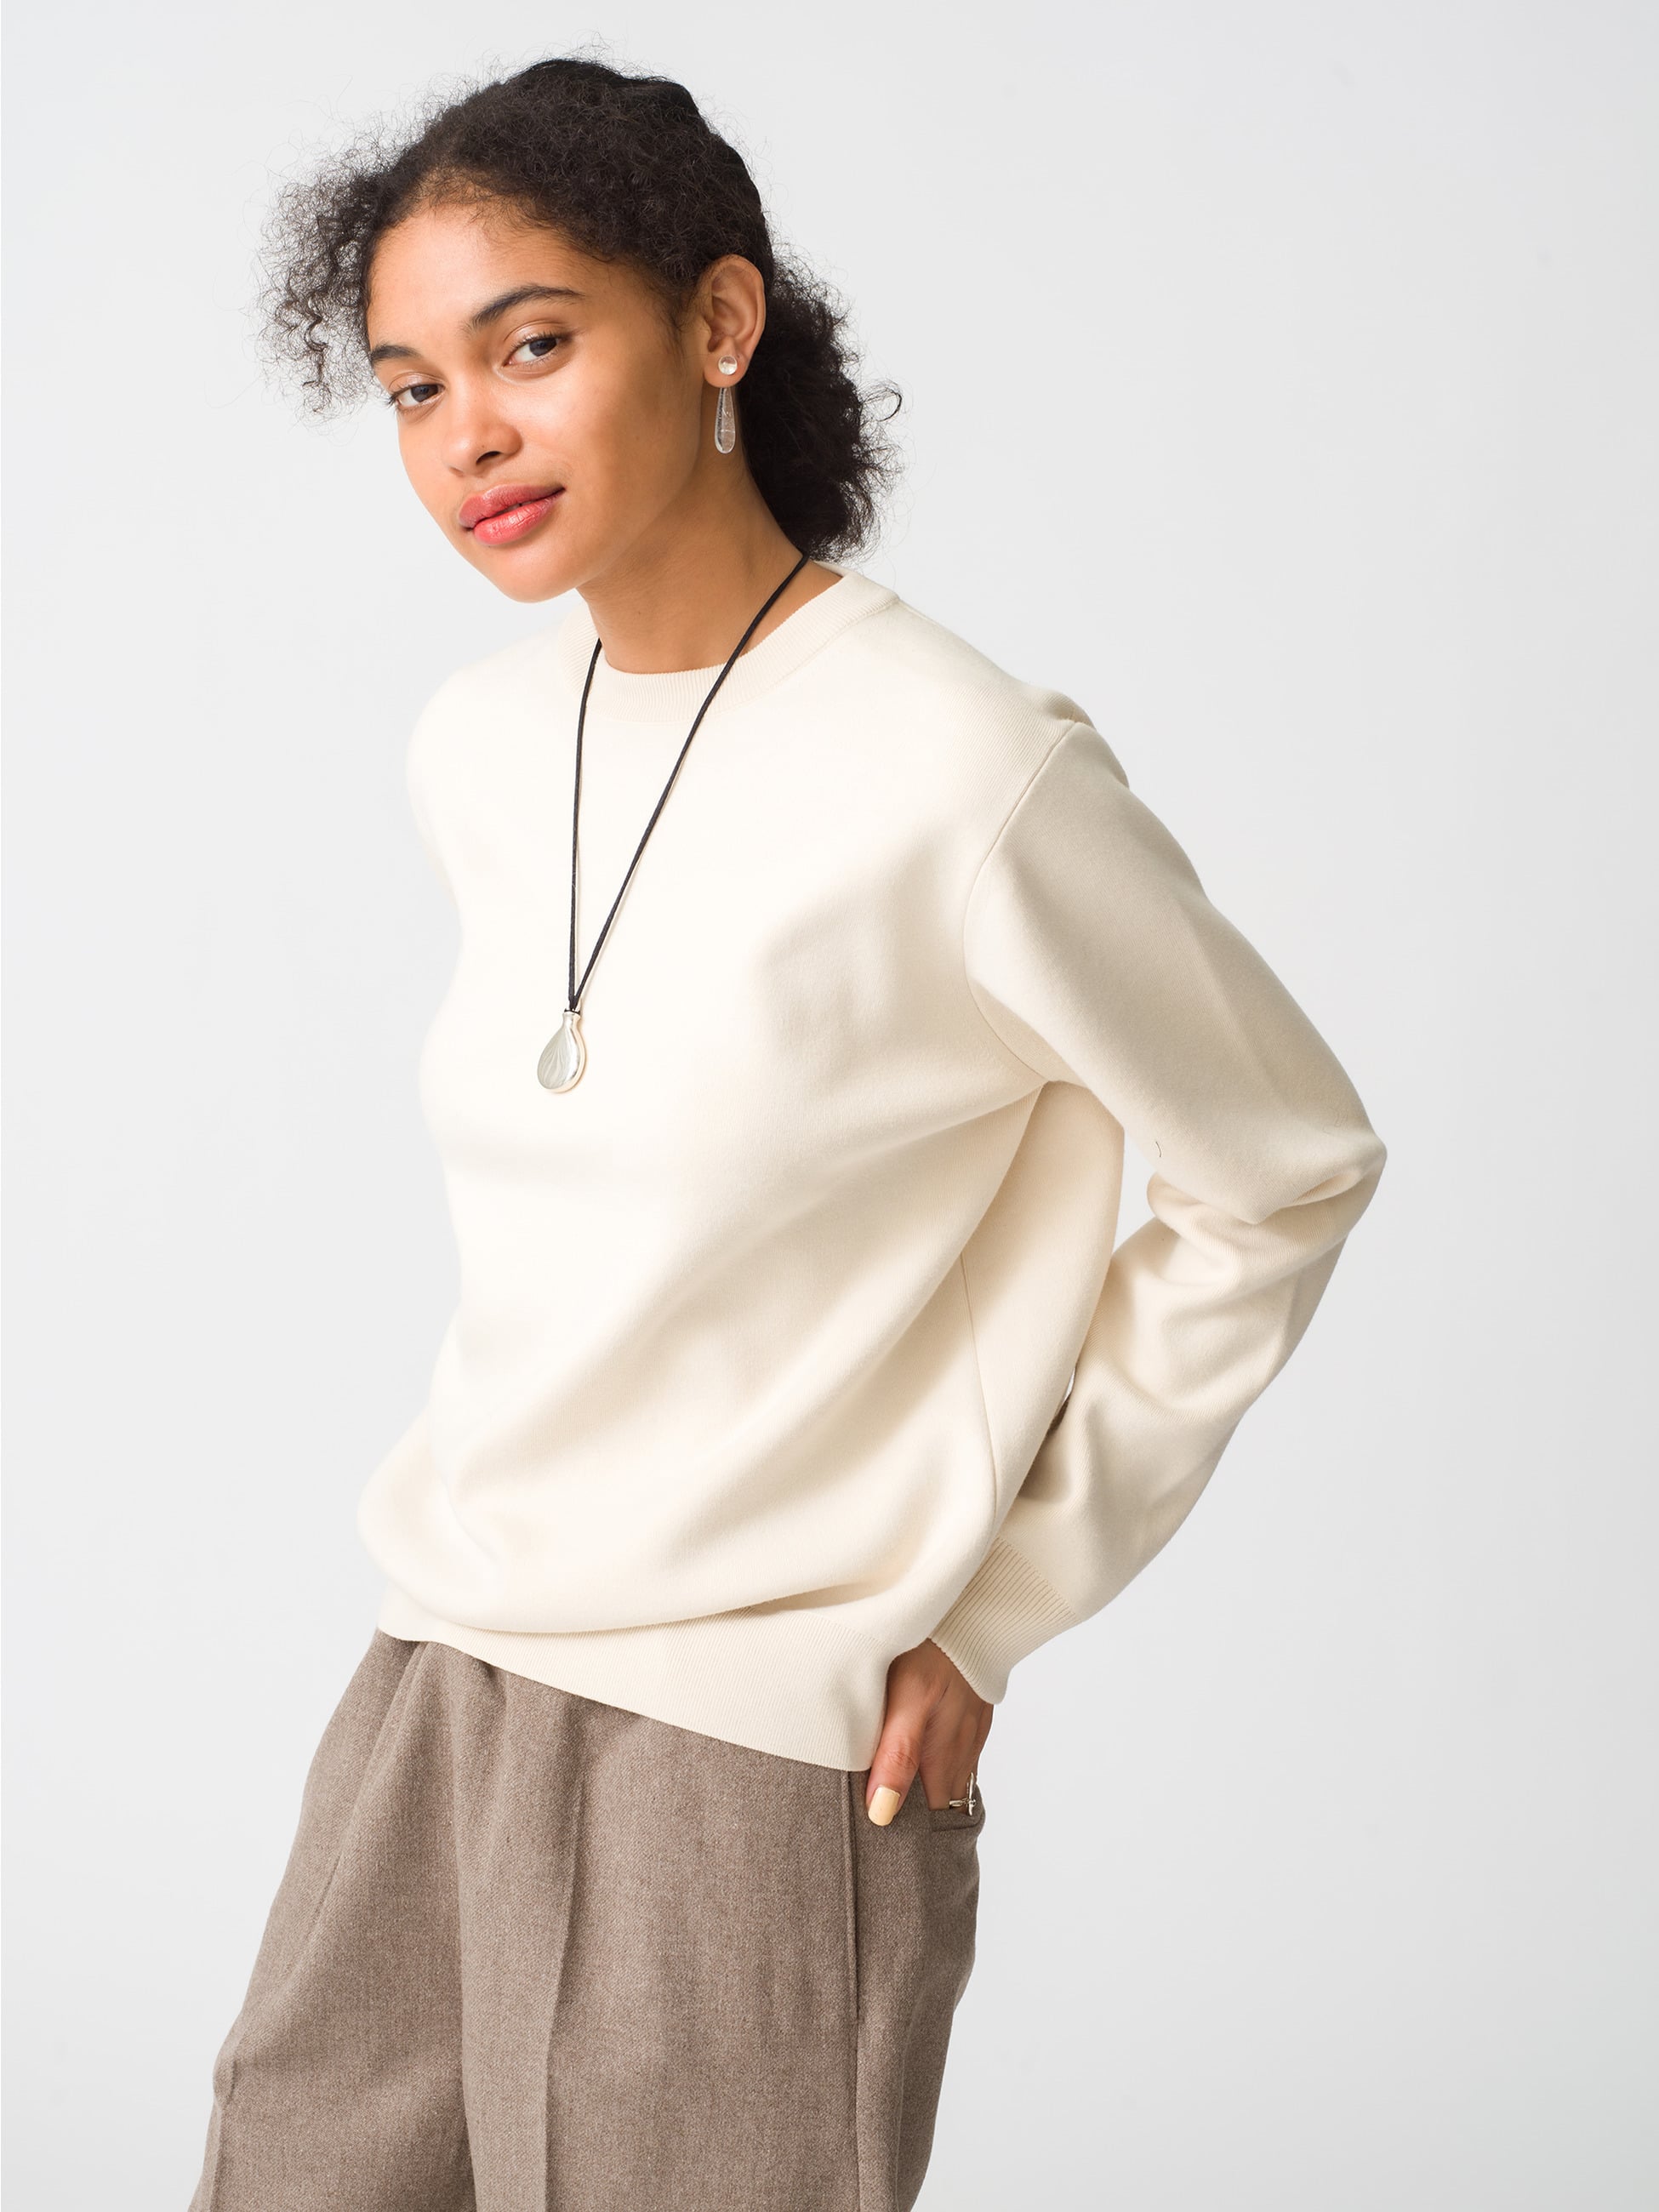 Brewed Protein Organic Cotton Knit Pullover 詳細画像 ivory 1